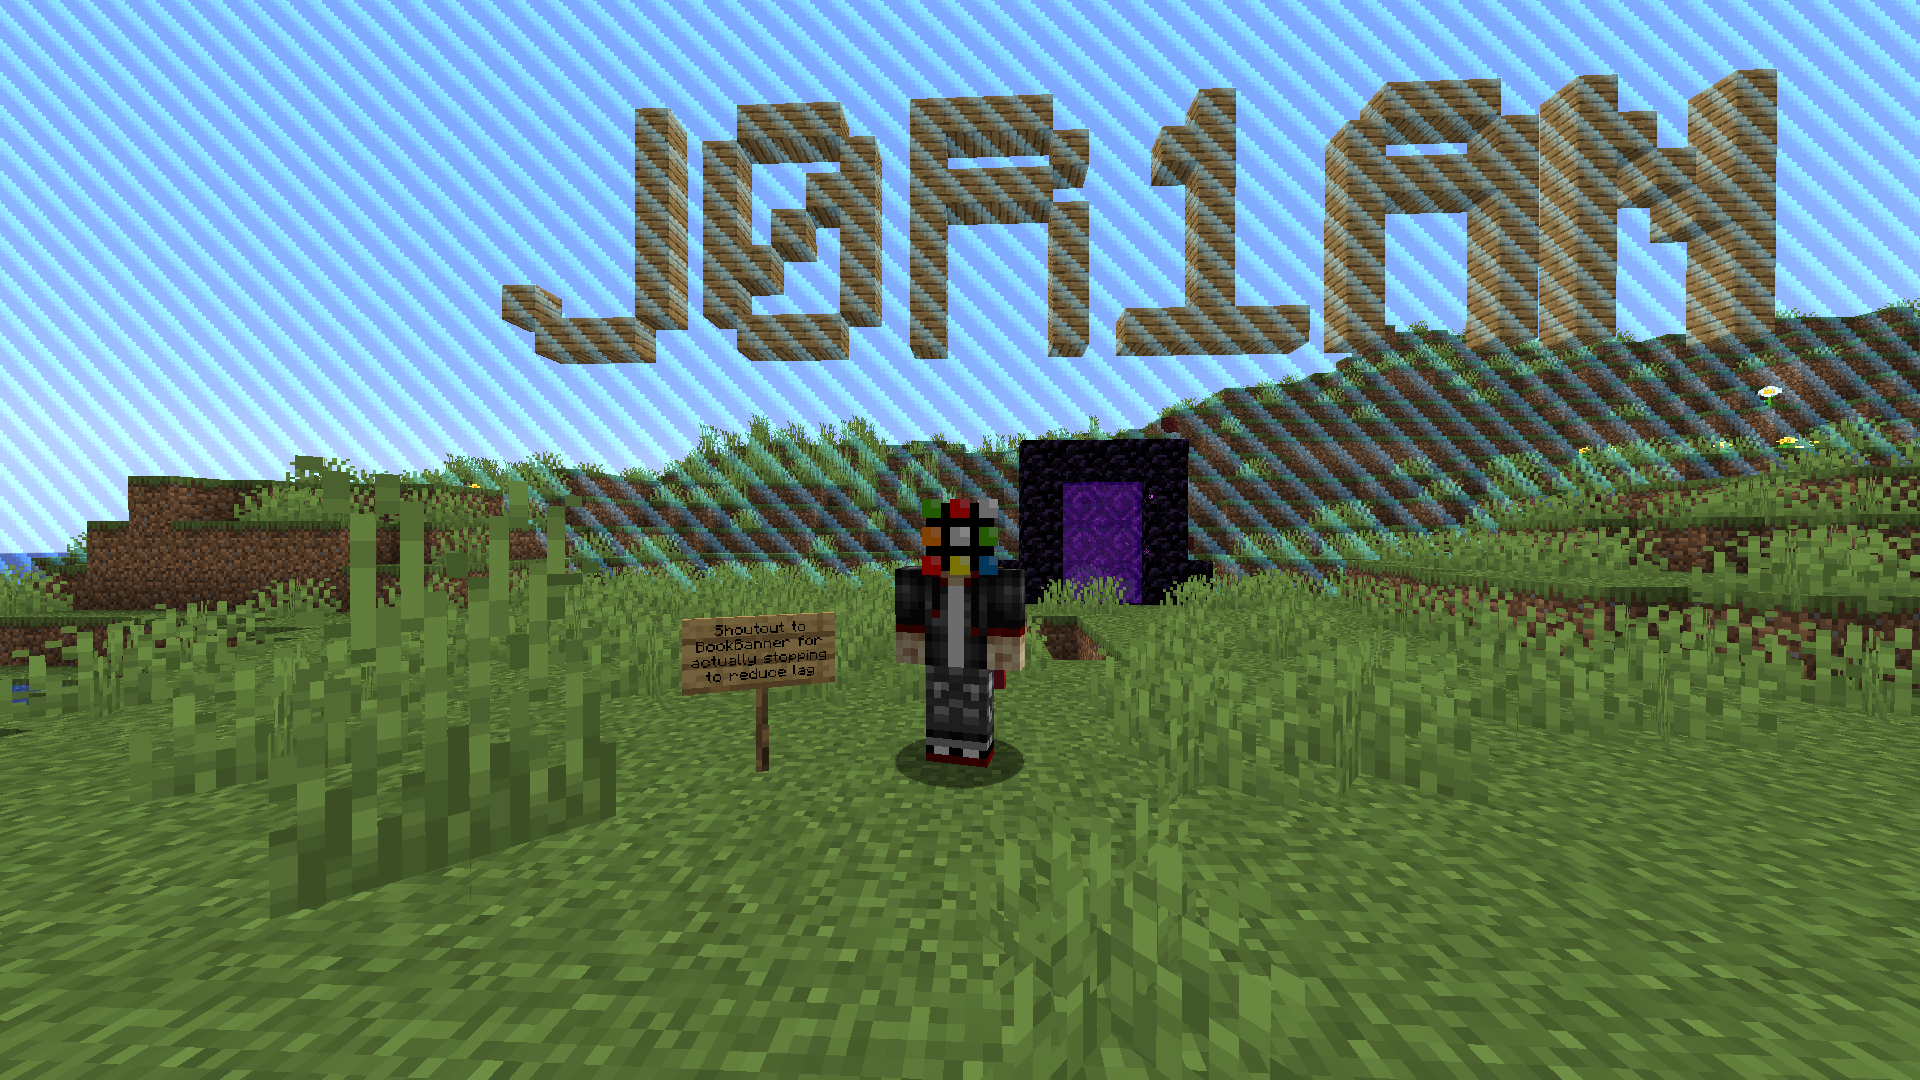 A screenshot of me at the World Border on the server, with text made of blocks in the background